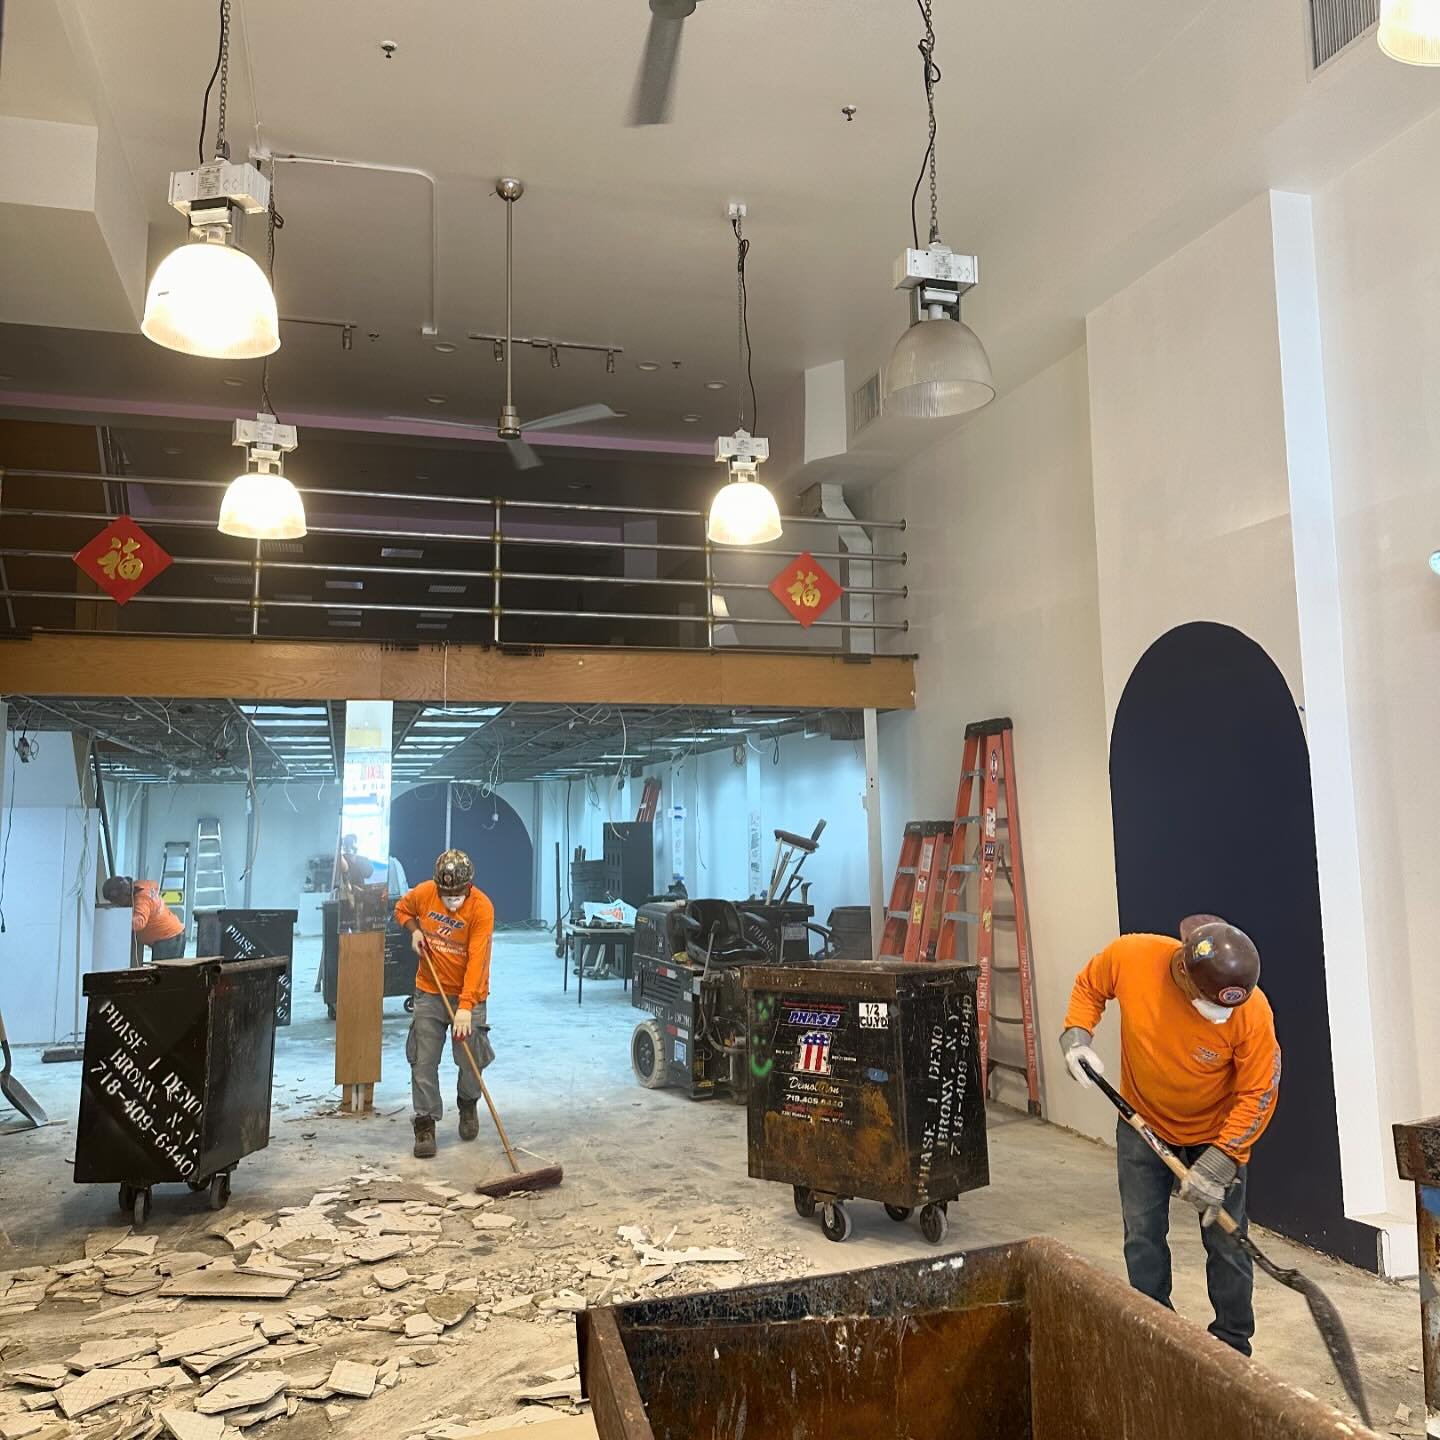 It&rsquo;s full steam ahead over at The Hub! Construction started just last week, beginning with demolition &ndash; specifically our old floors. (While those tiles served as well, anyone who attended or co-hosted an event knows how much of a pain tho